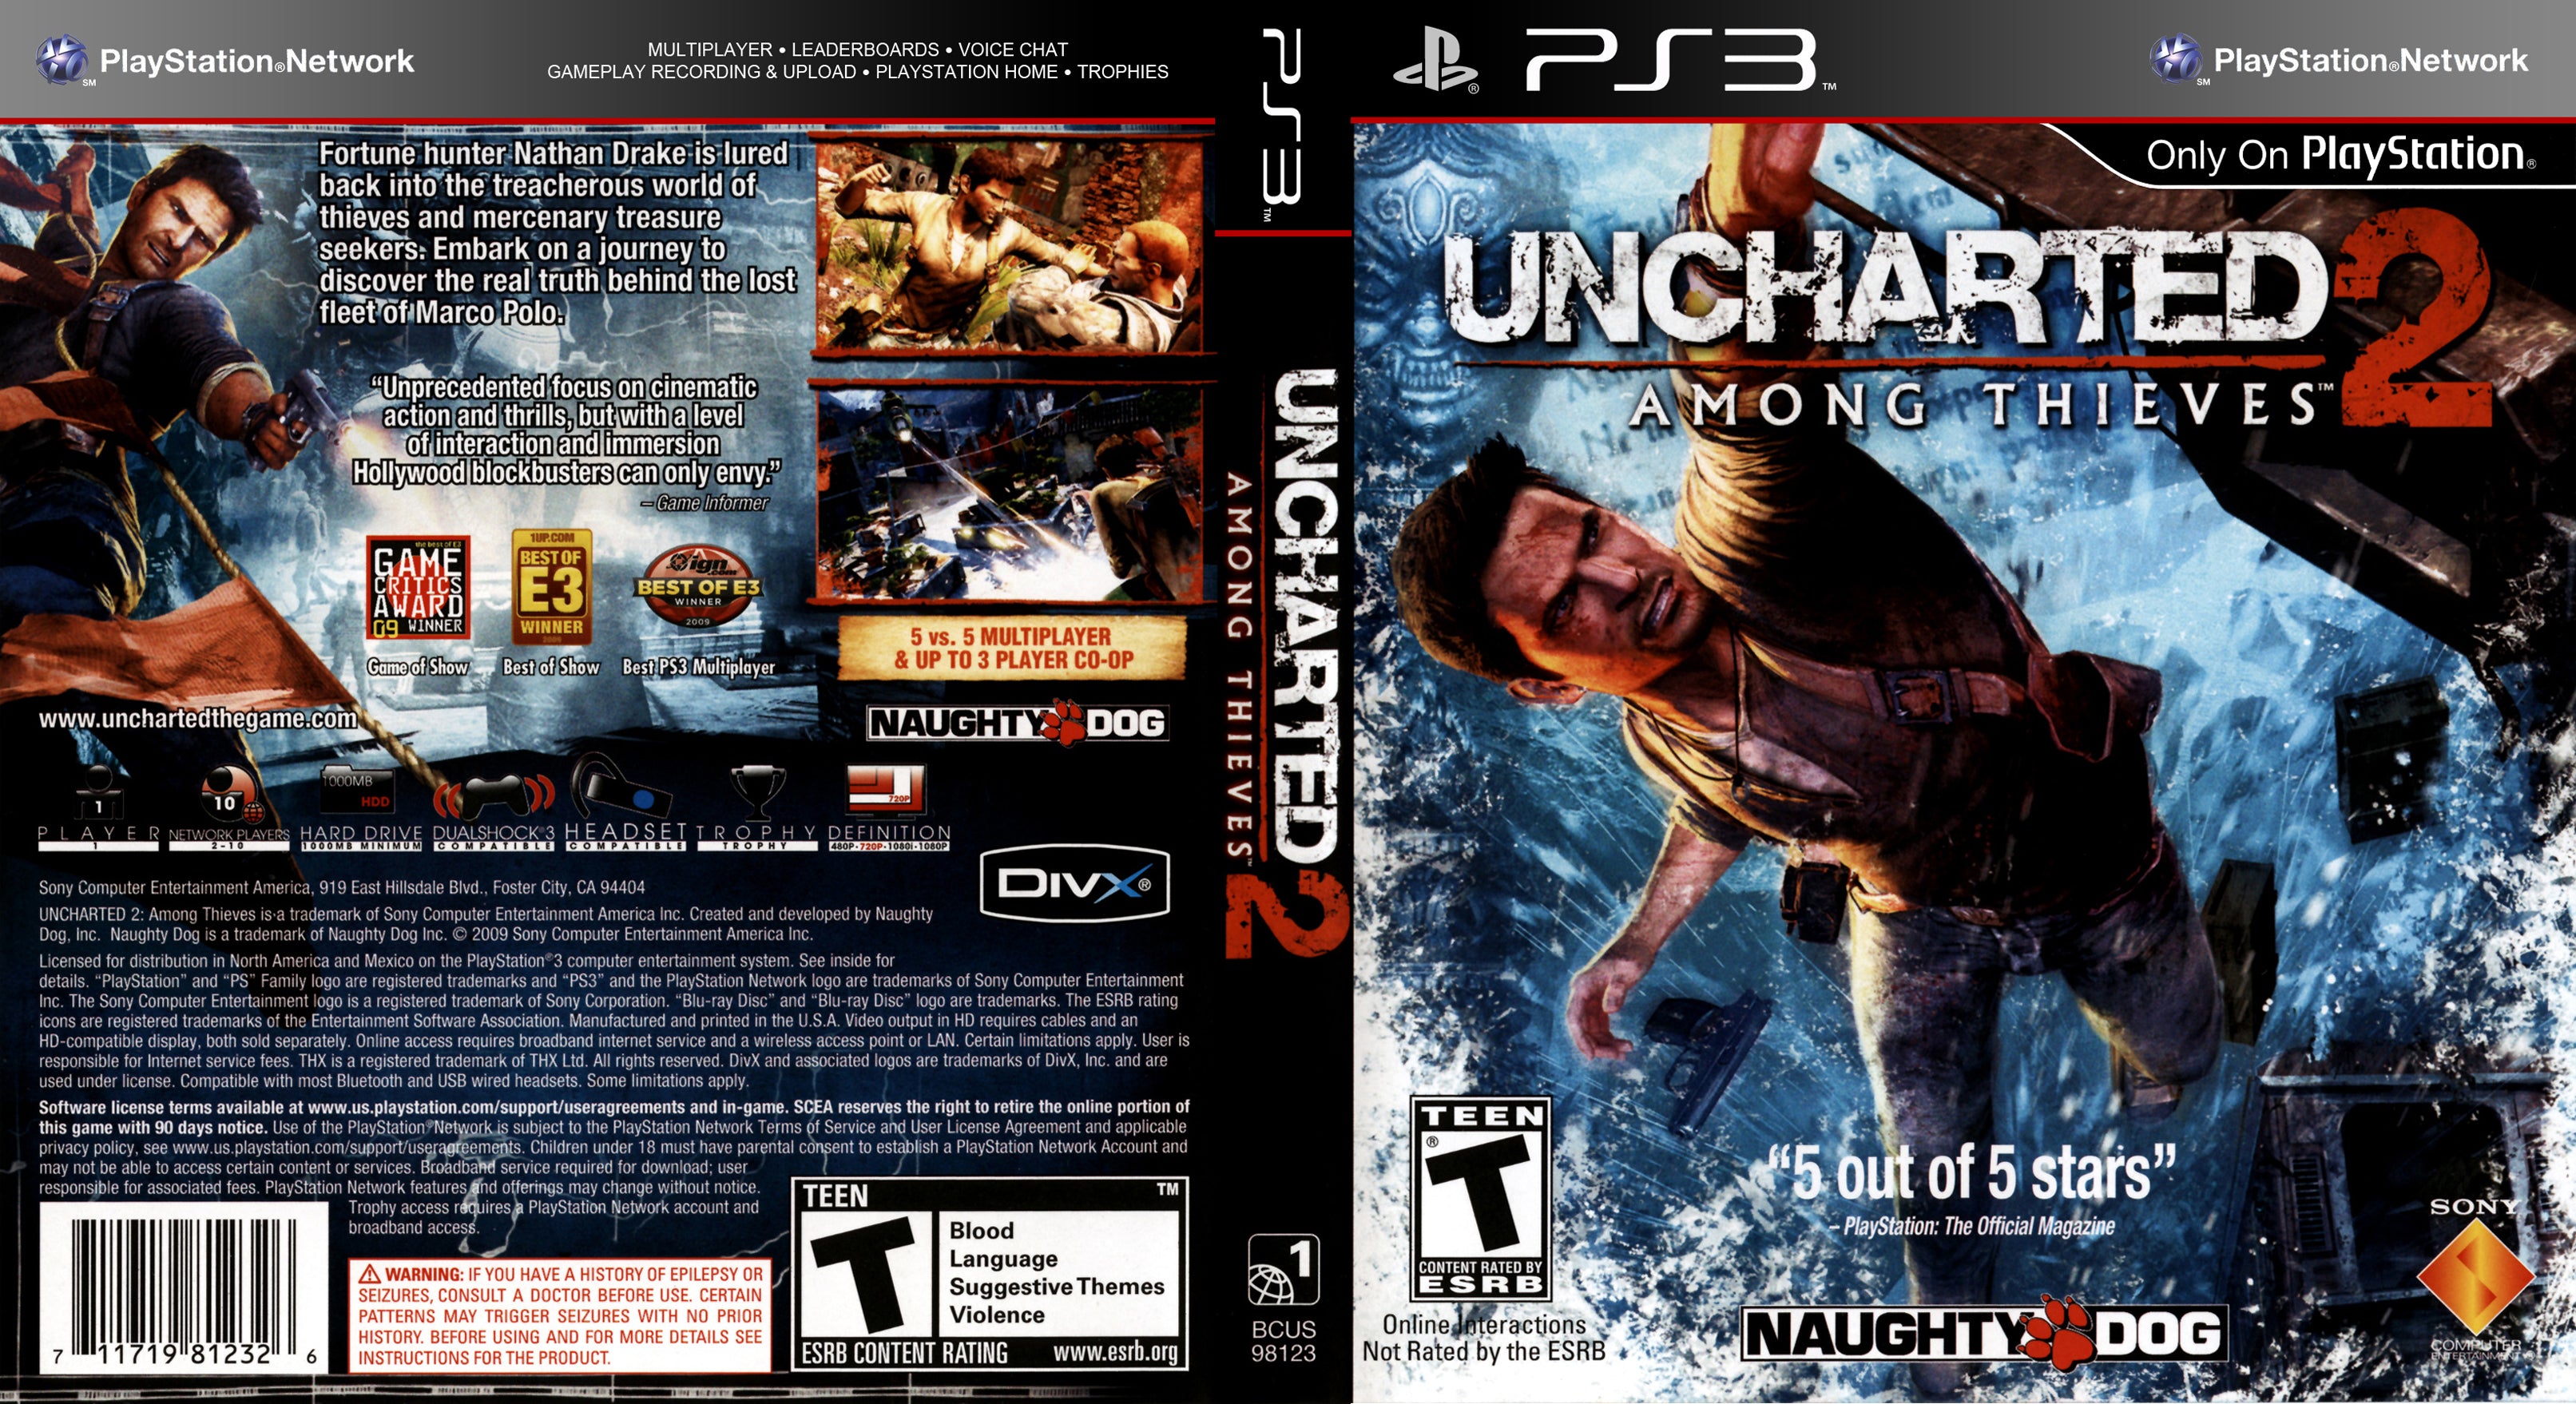 Uncharted + Uncharted 2 Dual Pack Used PS3 Games For Sale